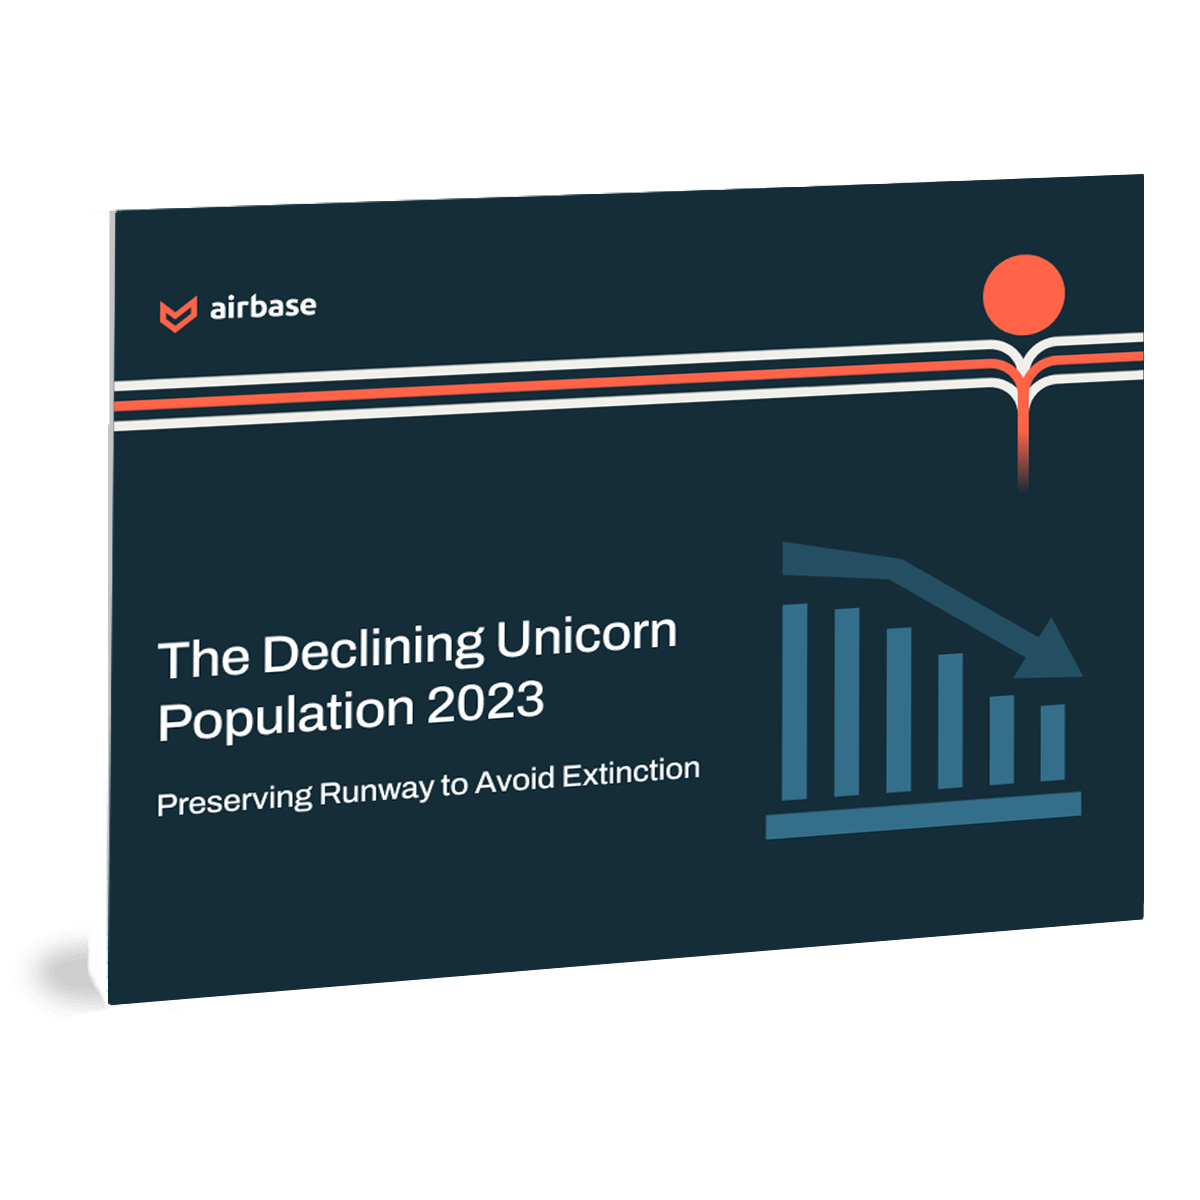 The Declining Unicorn Population 2023: Preserving Runway to Avoid Extinction